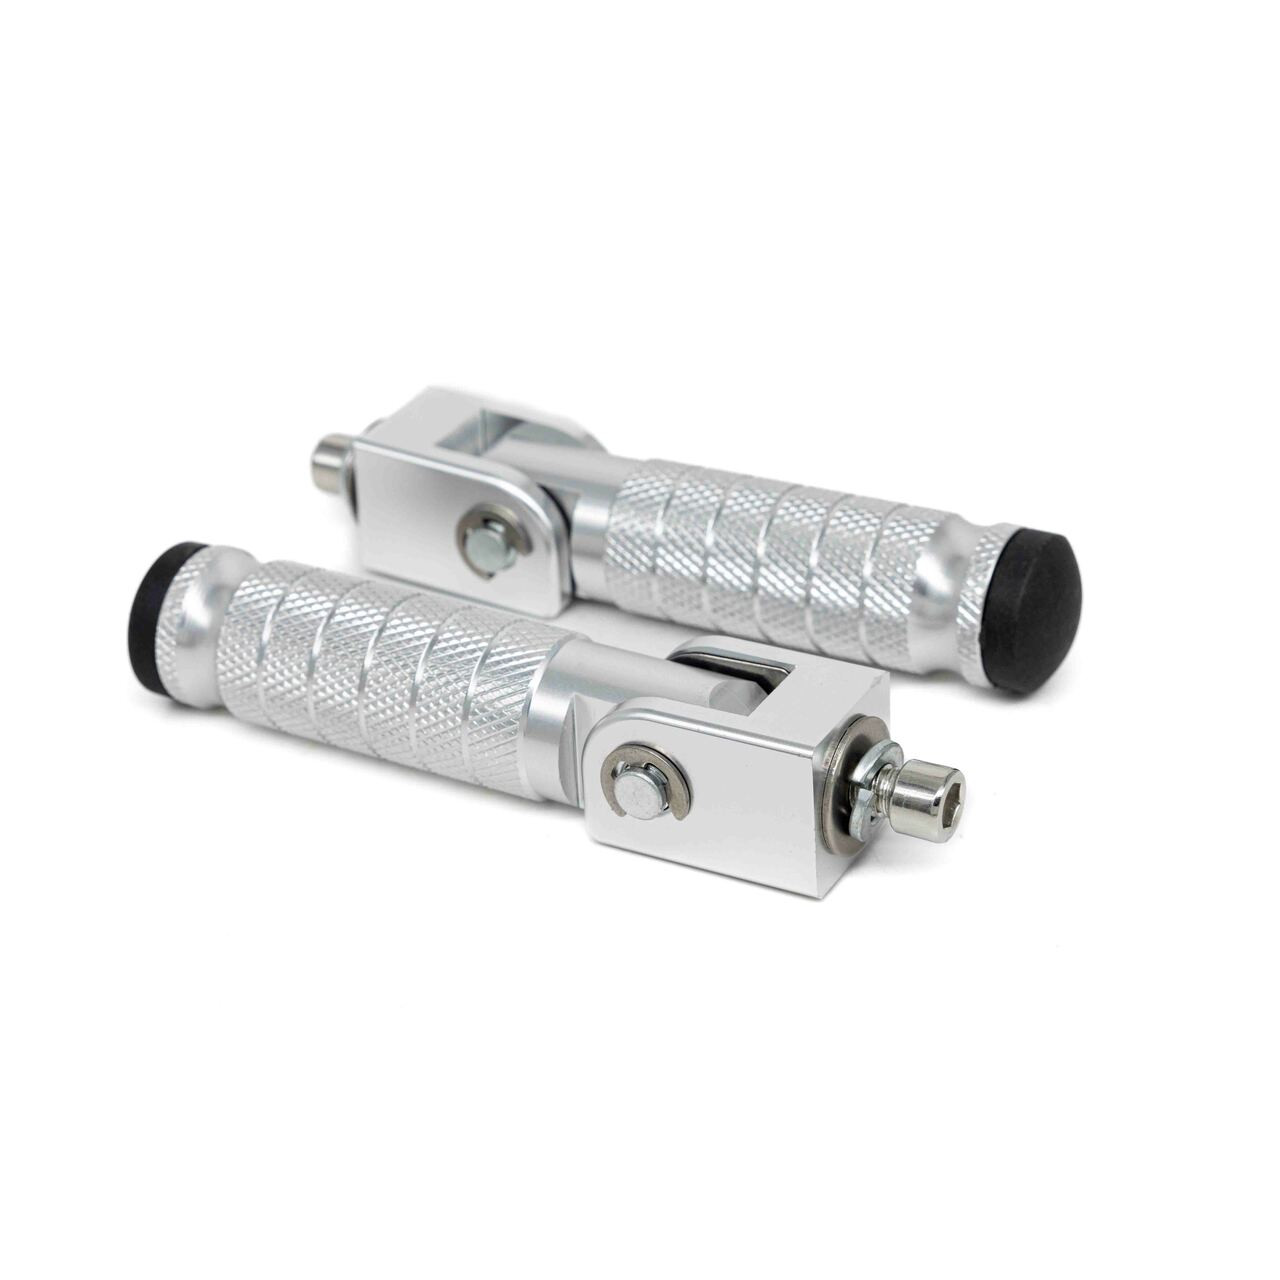 Billet Foot Pegs, Foldable, Smooth Knurl (BFP-SMOOTH) Silver